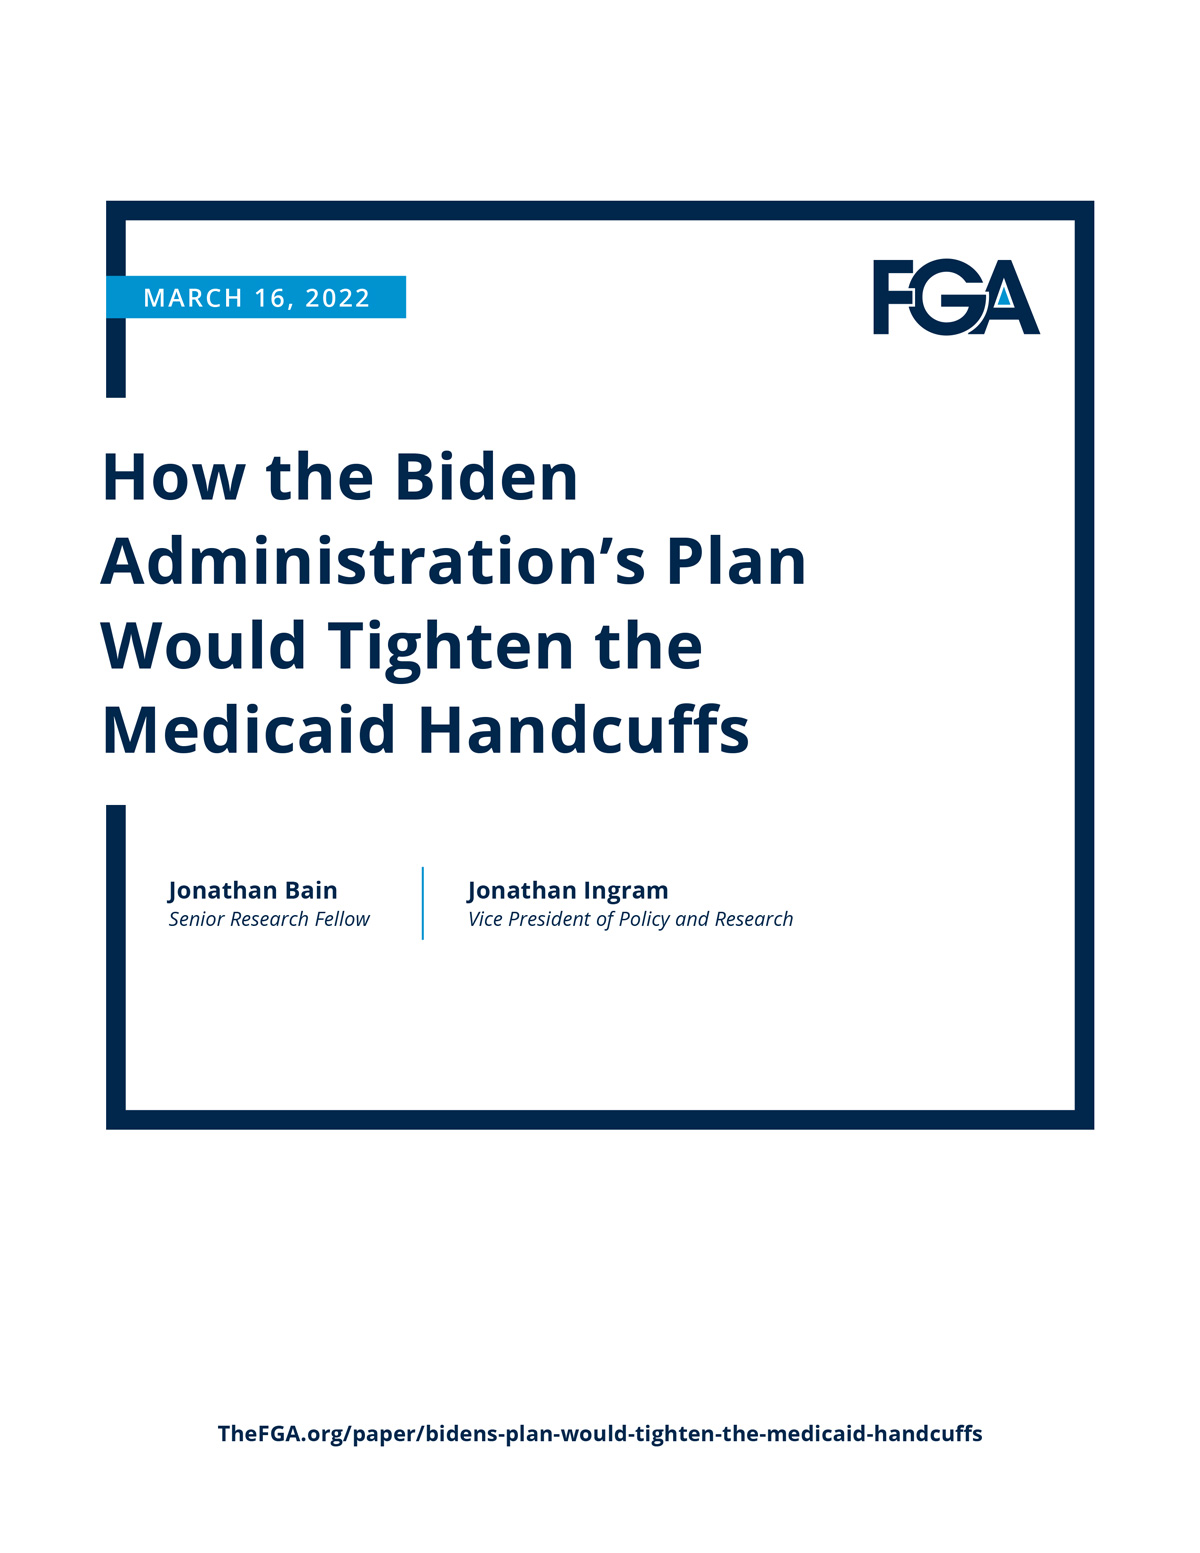 How the Biden Administration’s Plan Would Tighten the Medicaid Handcuffs